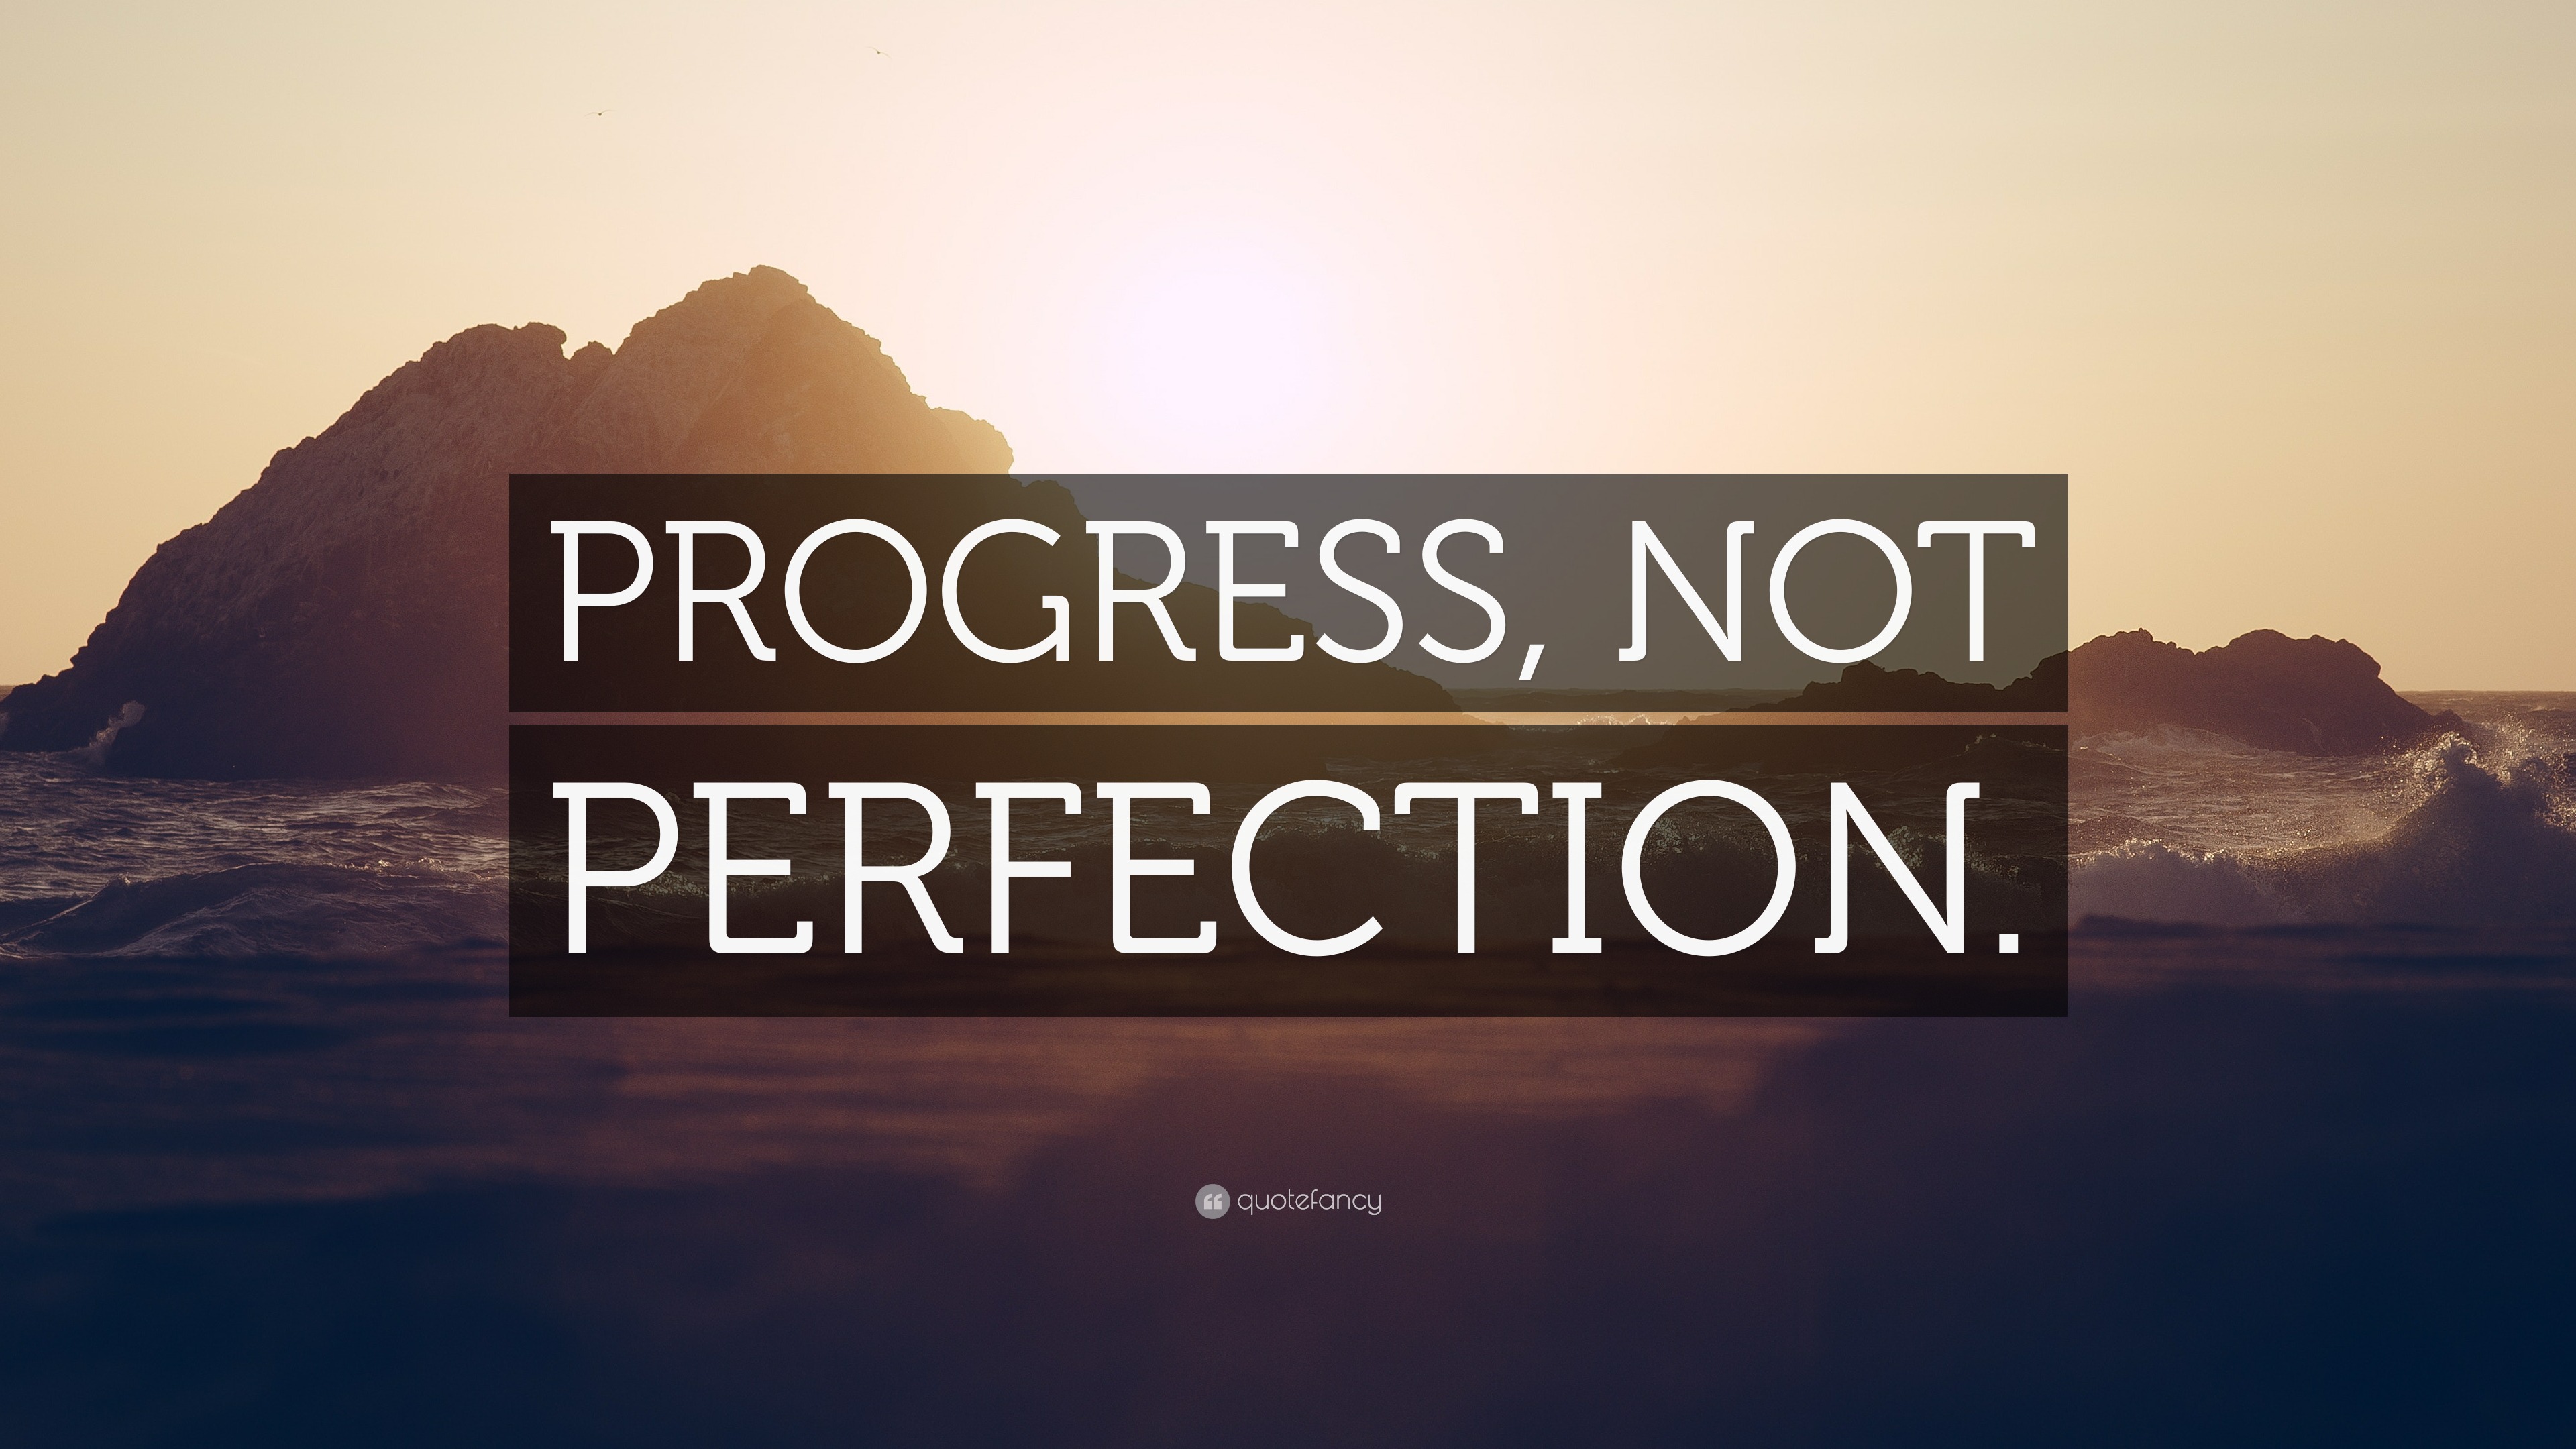 “PROGRESS, NOT PERFECTION.” Wallpaper by QuoteFancy